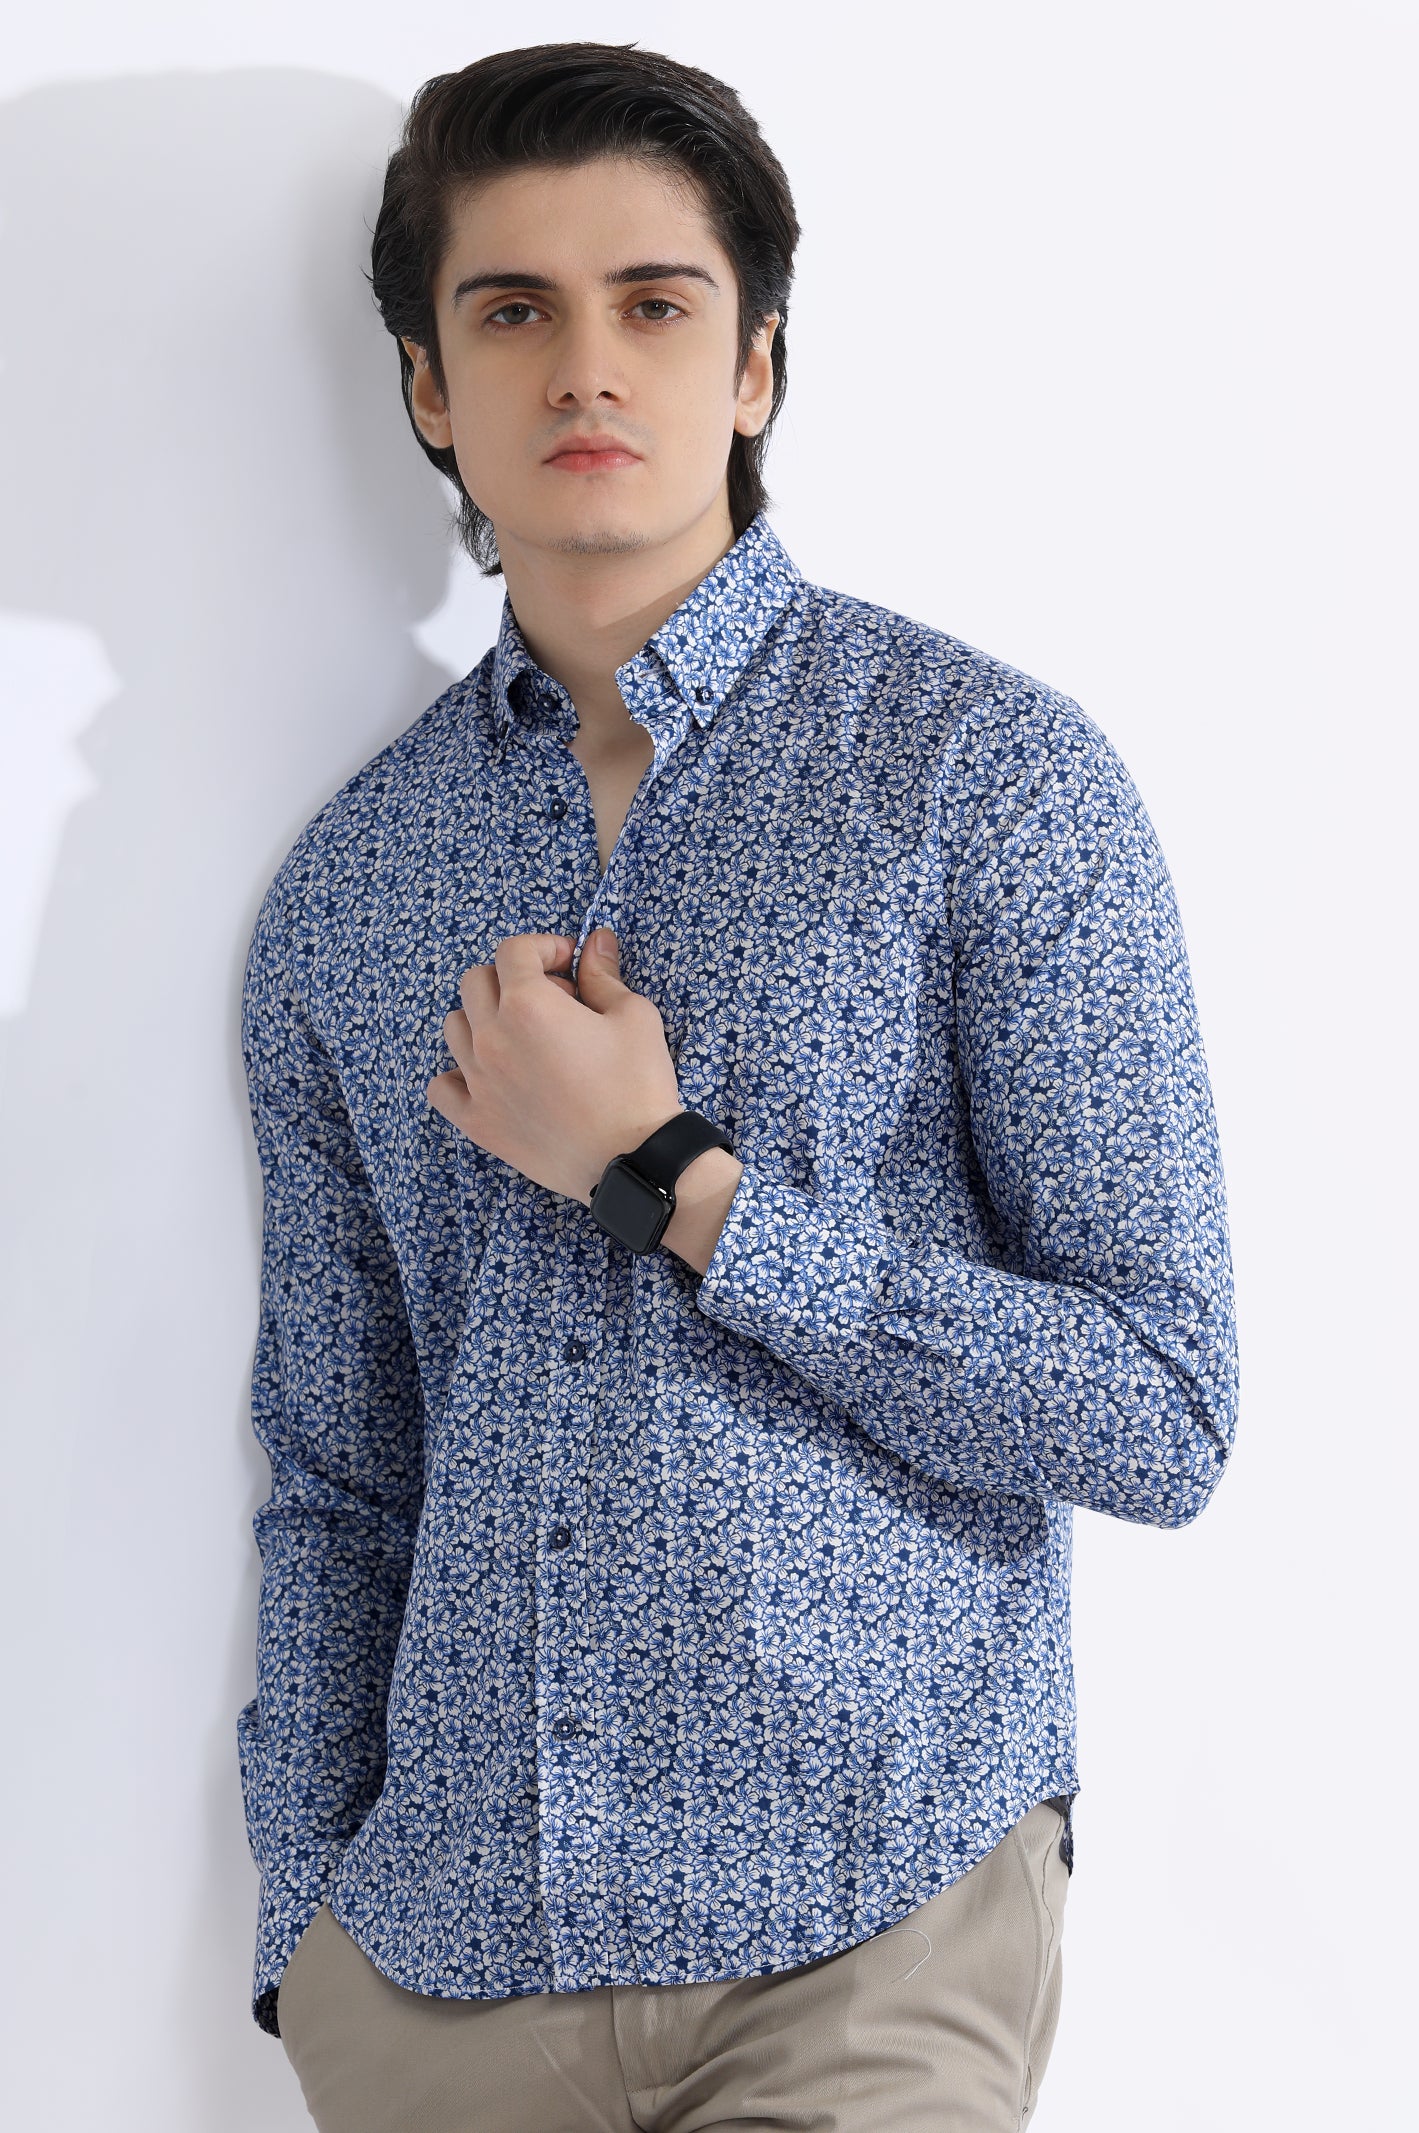 Blue Floral Printed Casual Milano Shirt From Diners